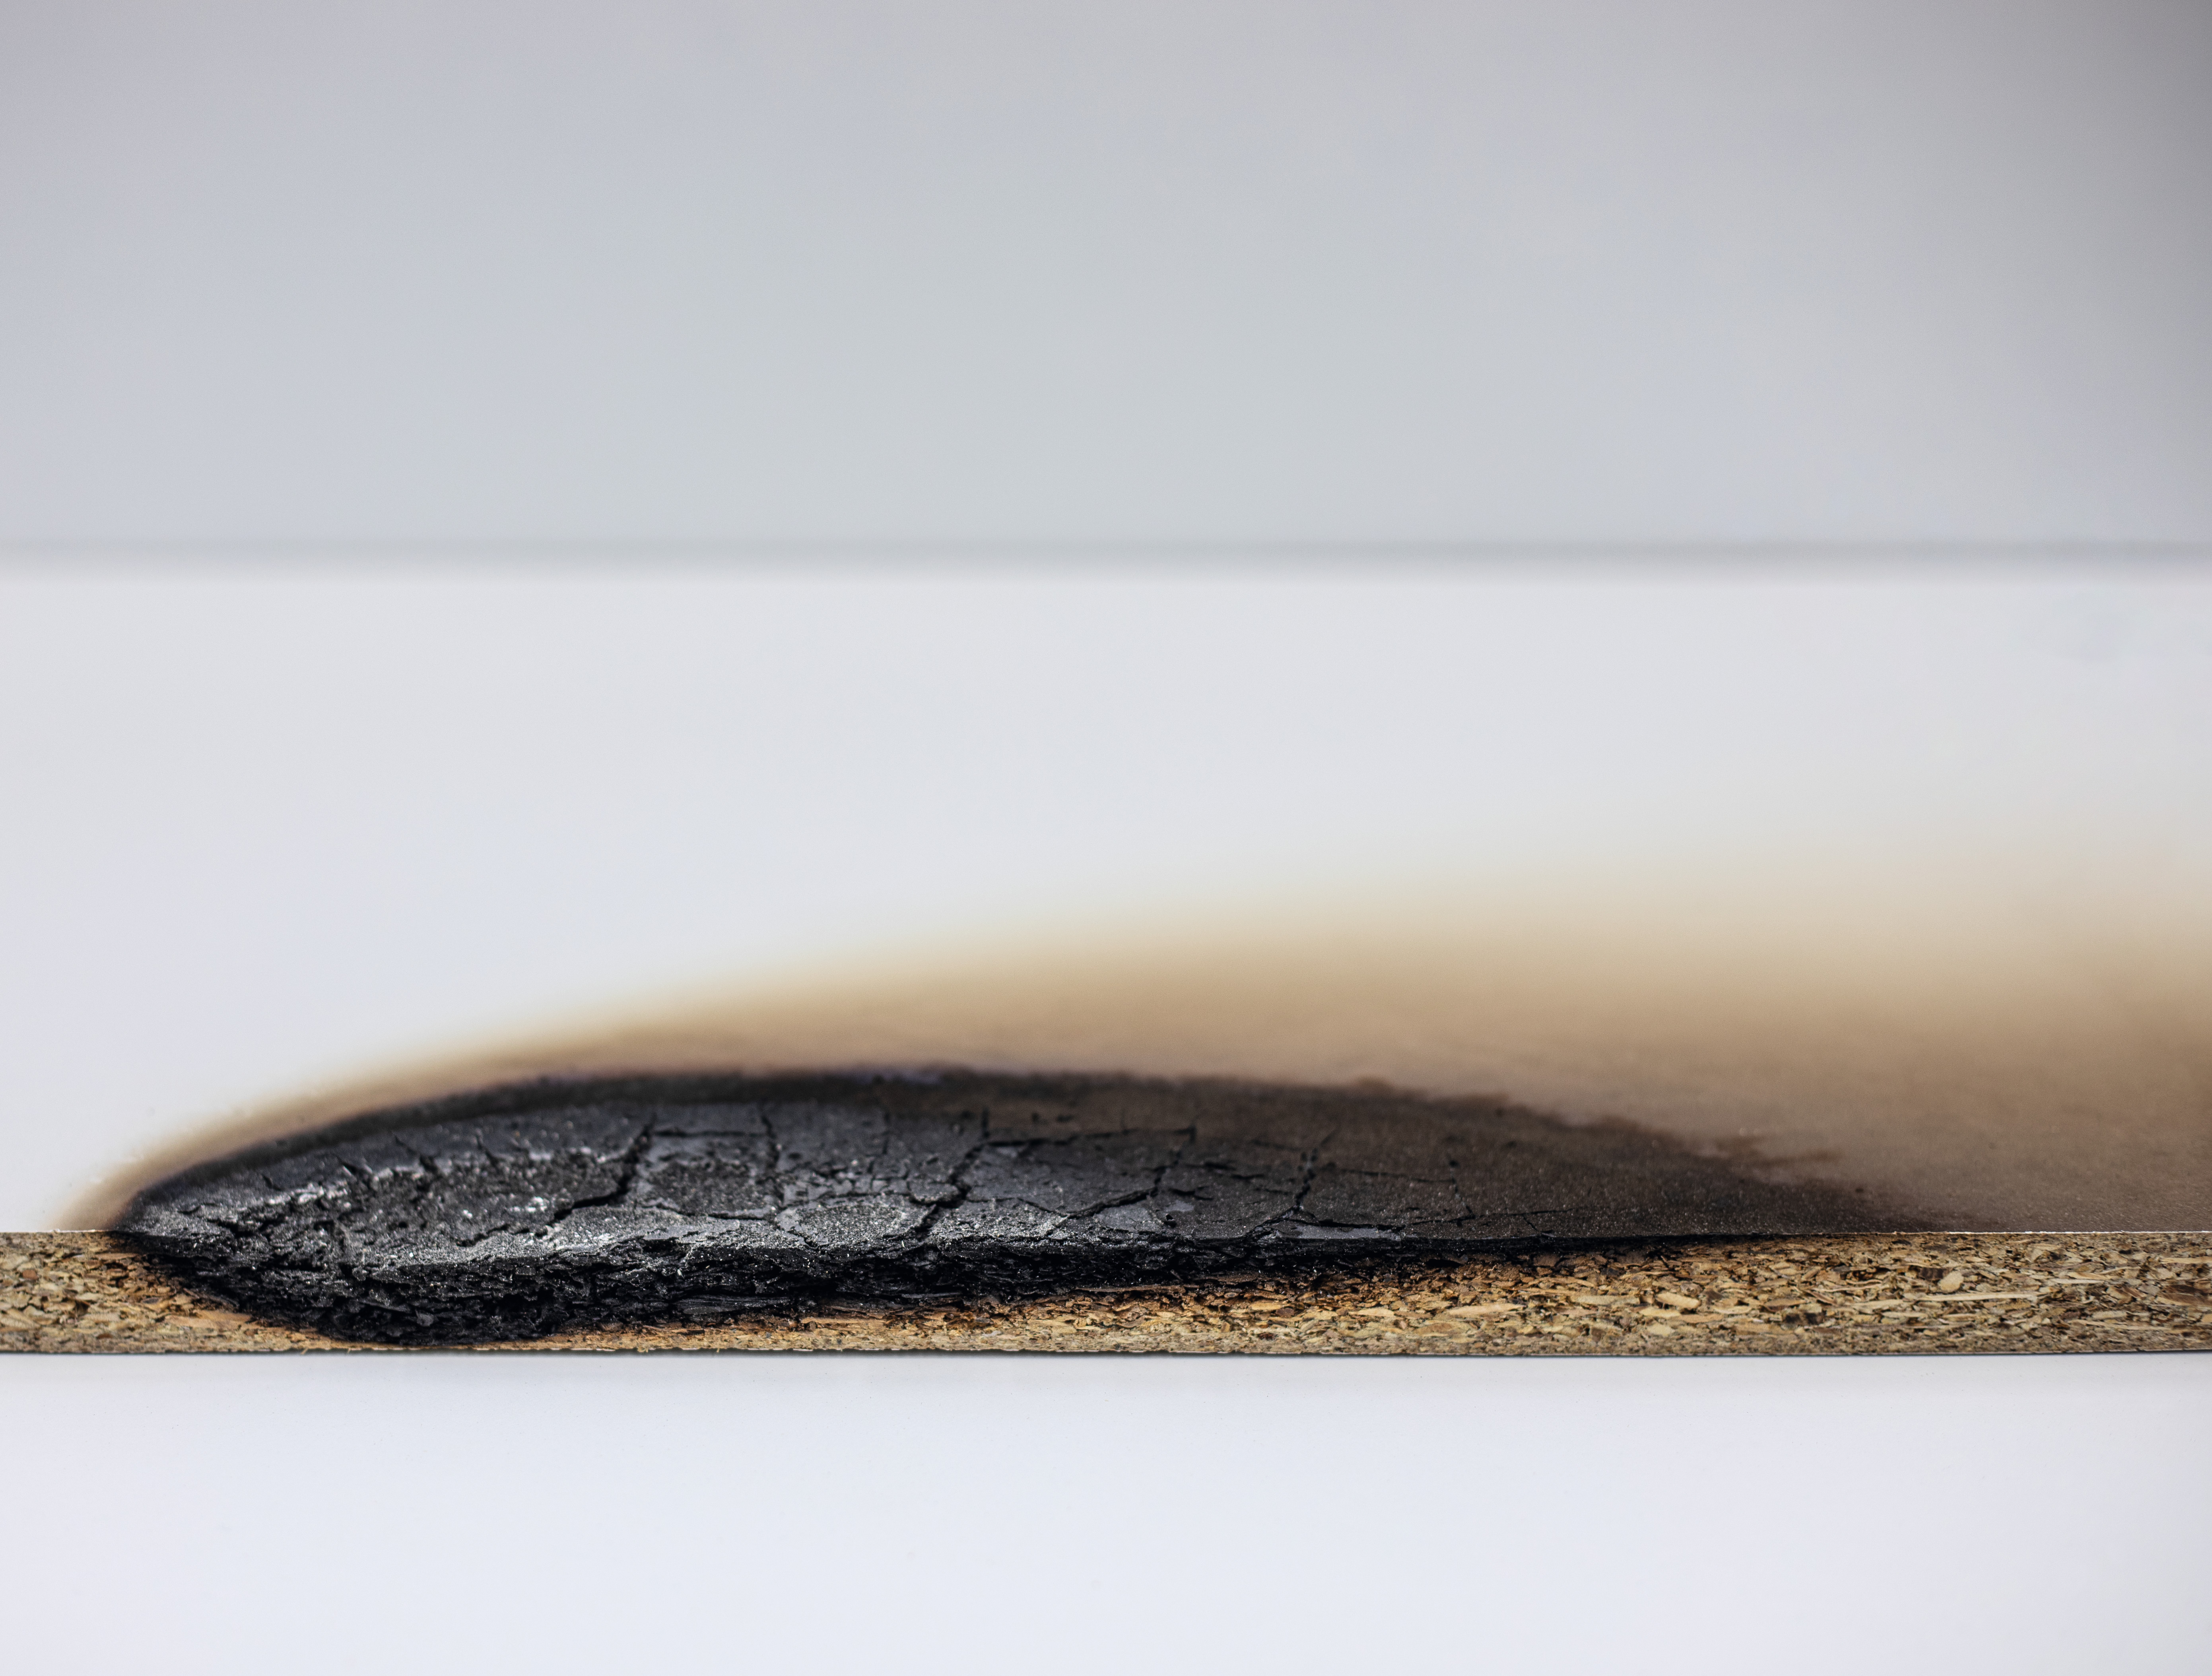 Eurodekor cross-section, after 30 min. flame treatment in the in-house laboratory using a Bunsen burner